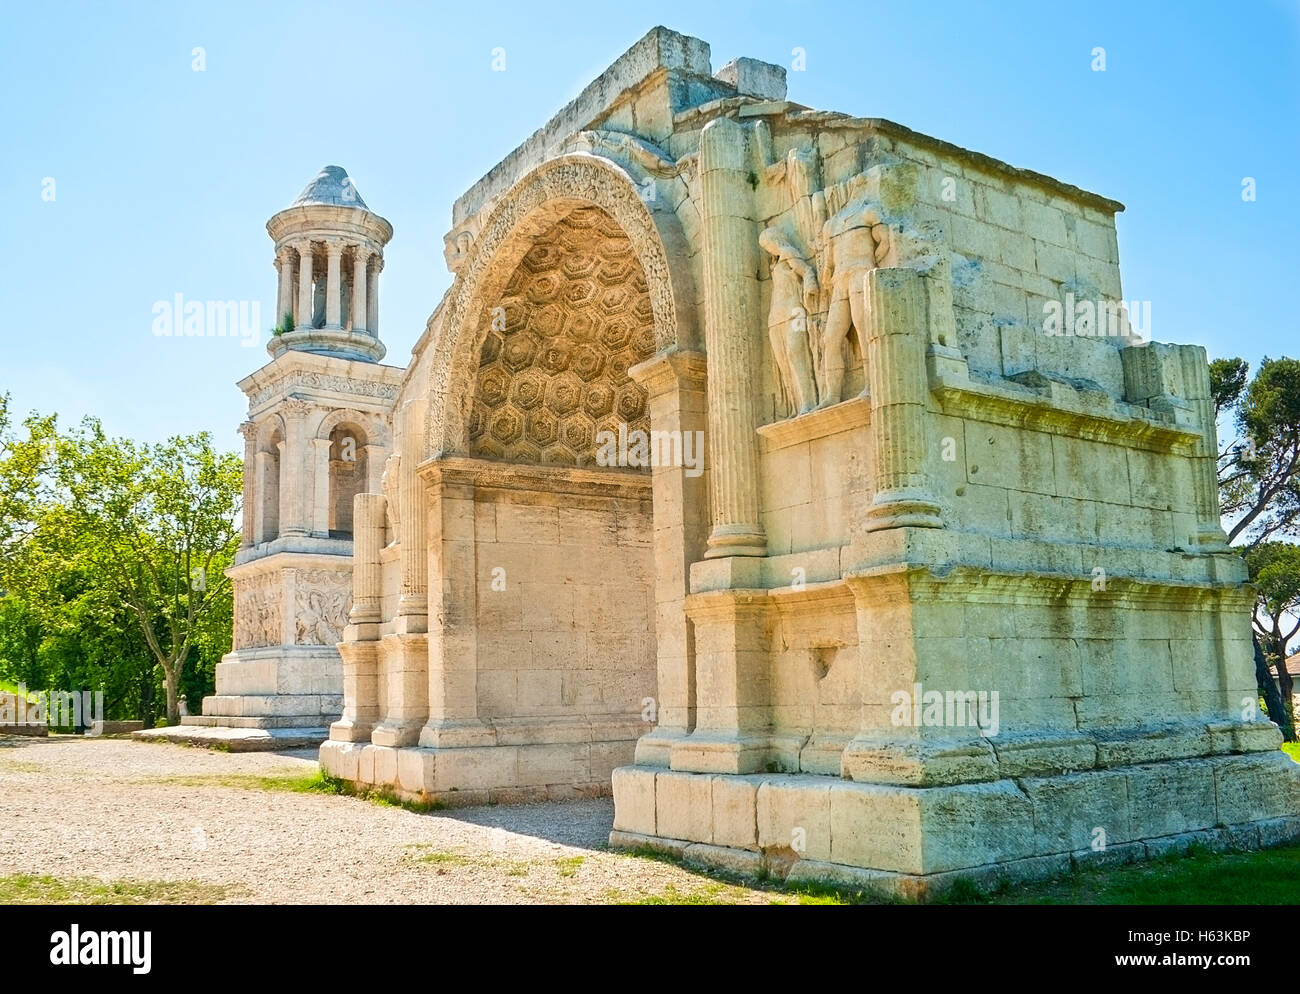 Well preserved examples of roman architecture - Mausoleum of Julii and Triumphal arch are located in the ancient town of Glanum, Stock Photo